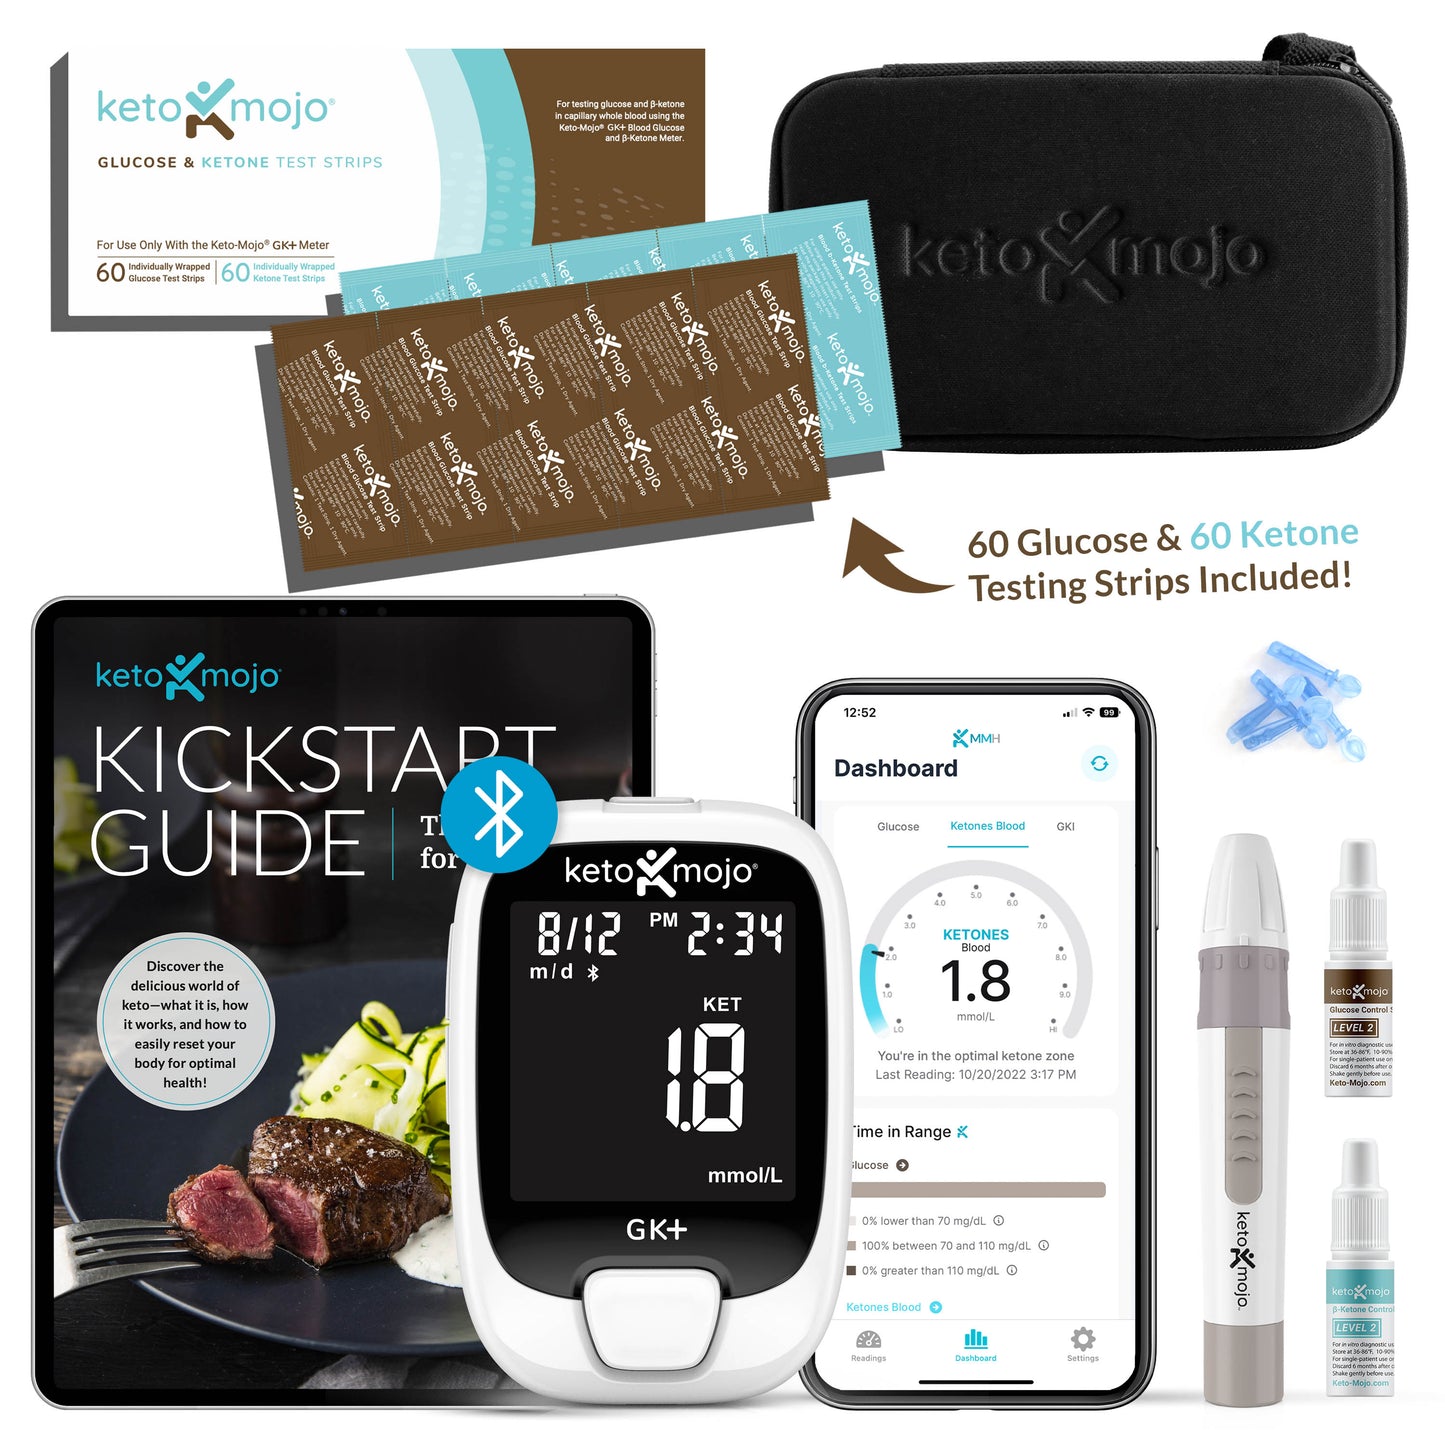 Keto Mojo Blood Glucose and Ketone Meter Unboxing 